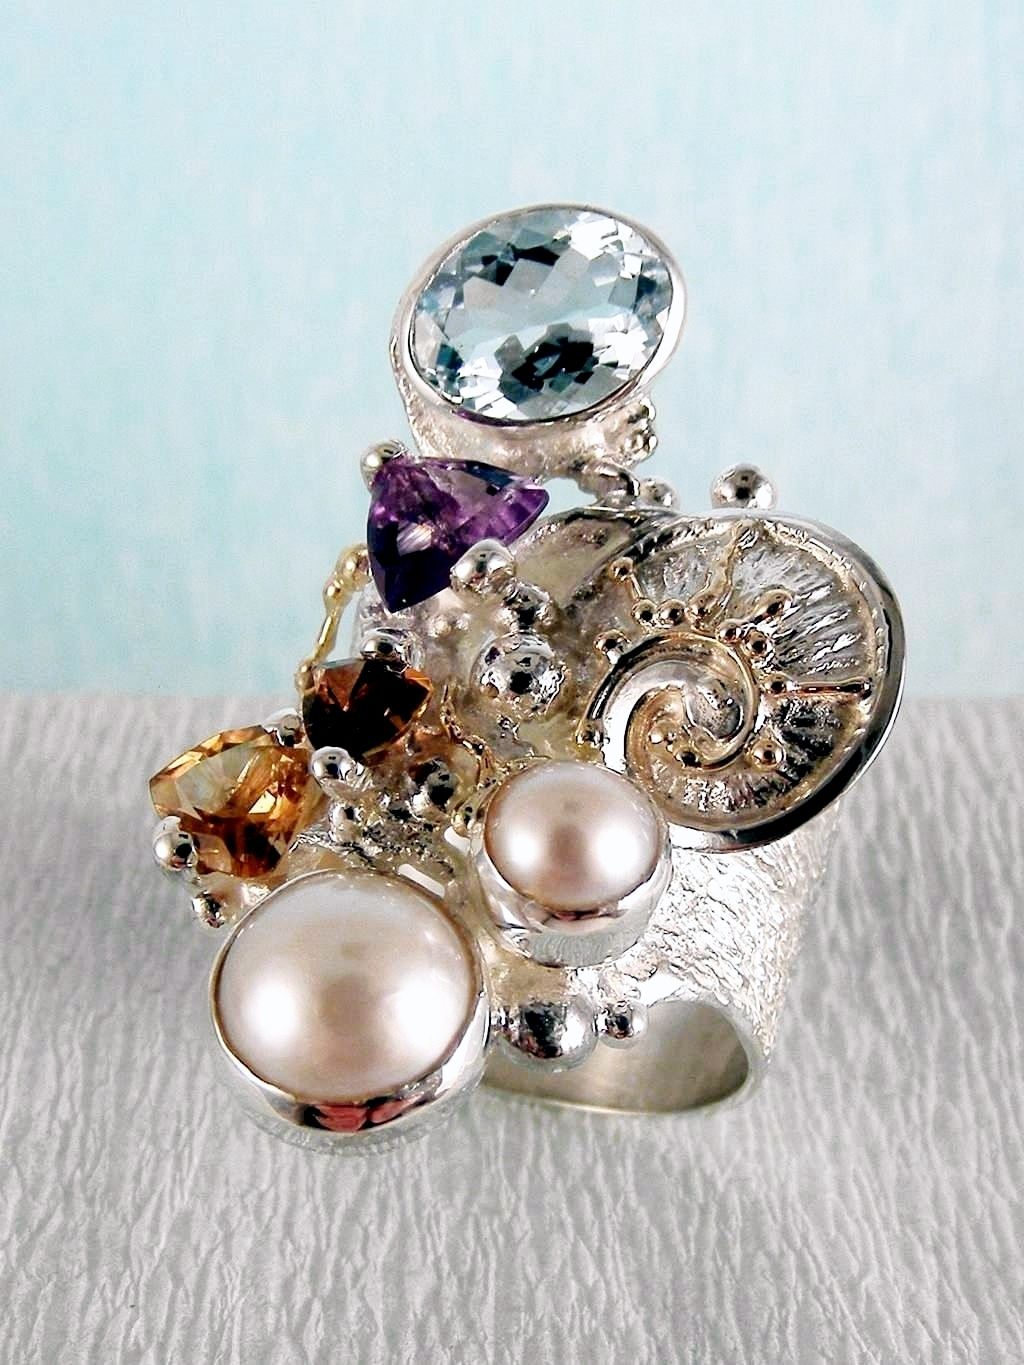 gregory pyra piro art jewellery, silver and gold jewellery with gemstones, gold and silver jewellery with gemstones and pearls, Band #Ring 2050